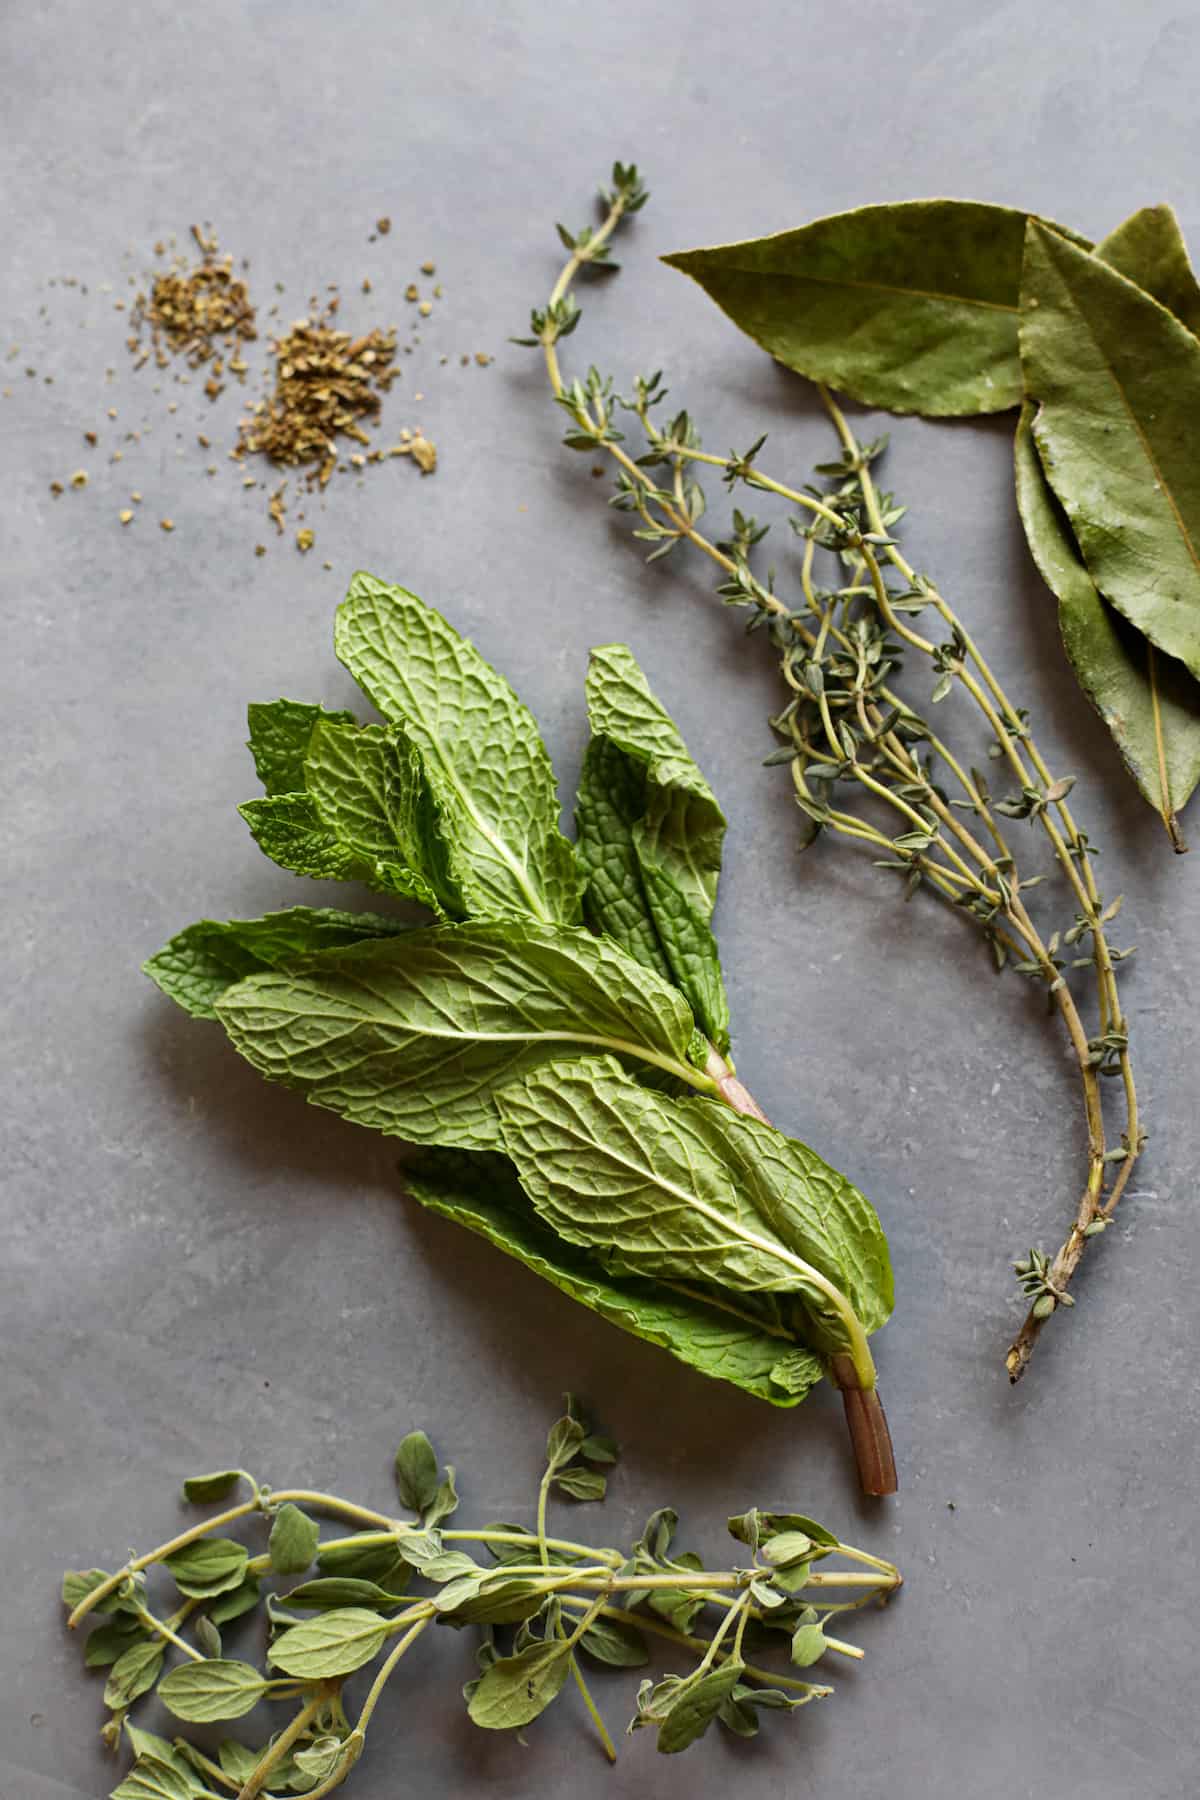 fresh mint, thyme, oregano and bay leaves on a gray background